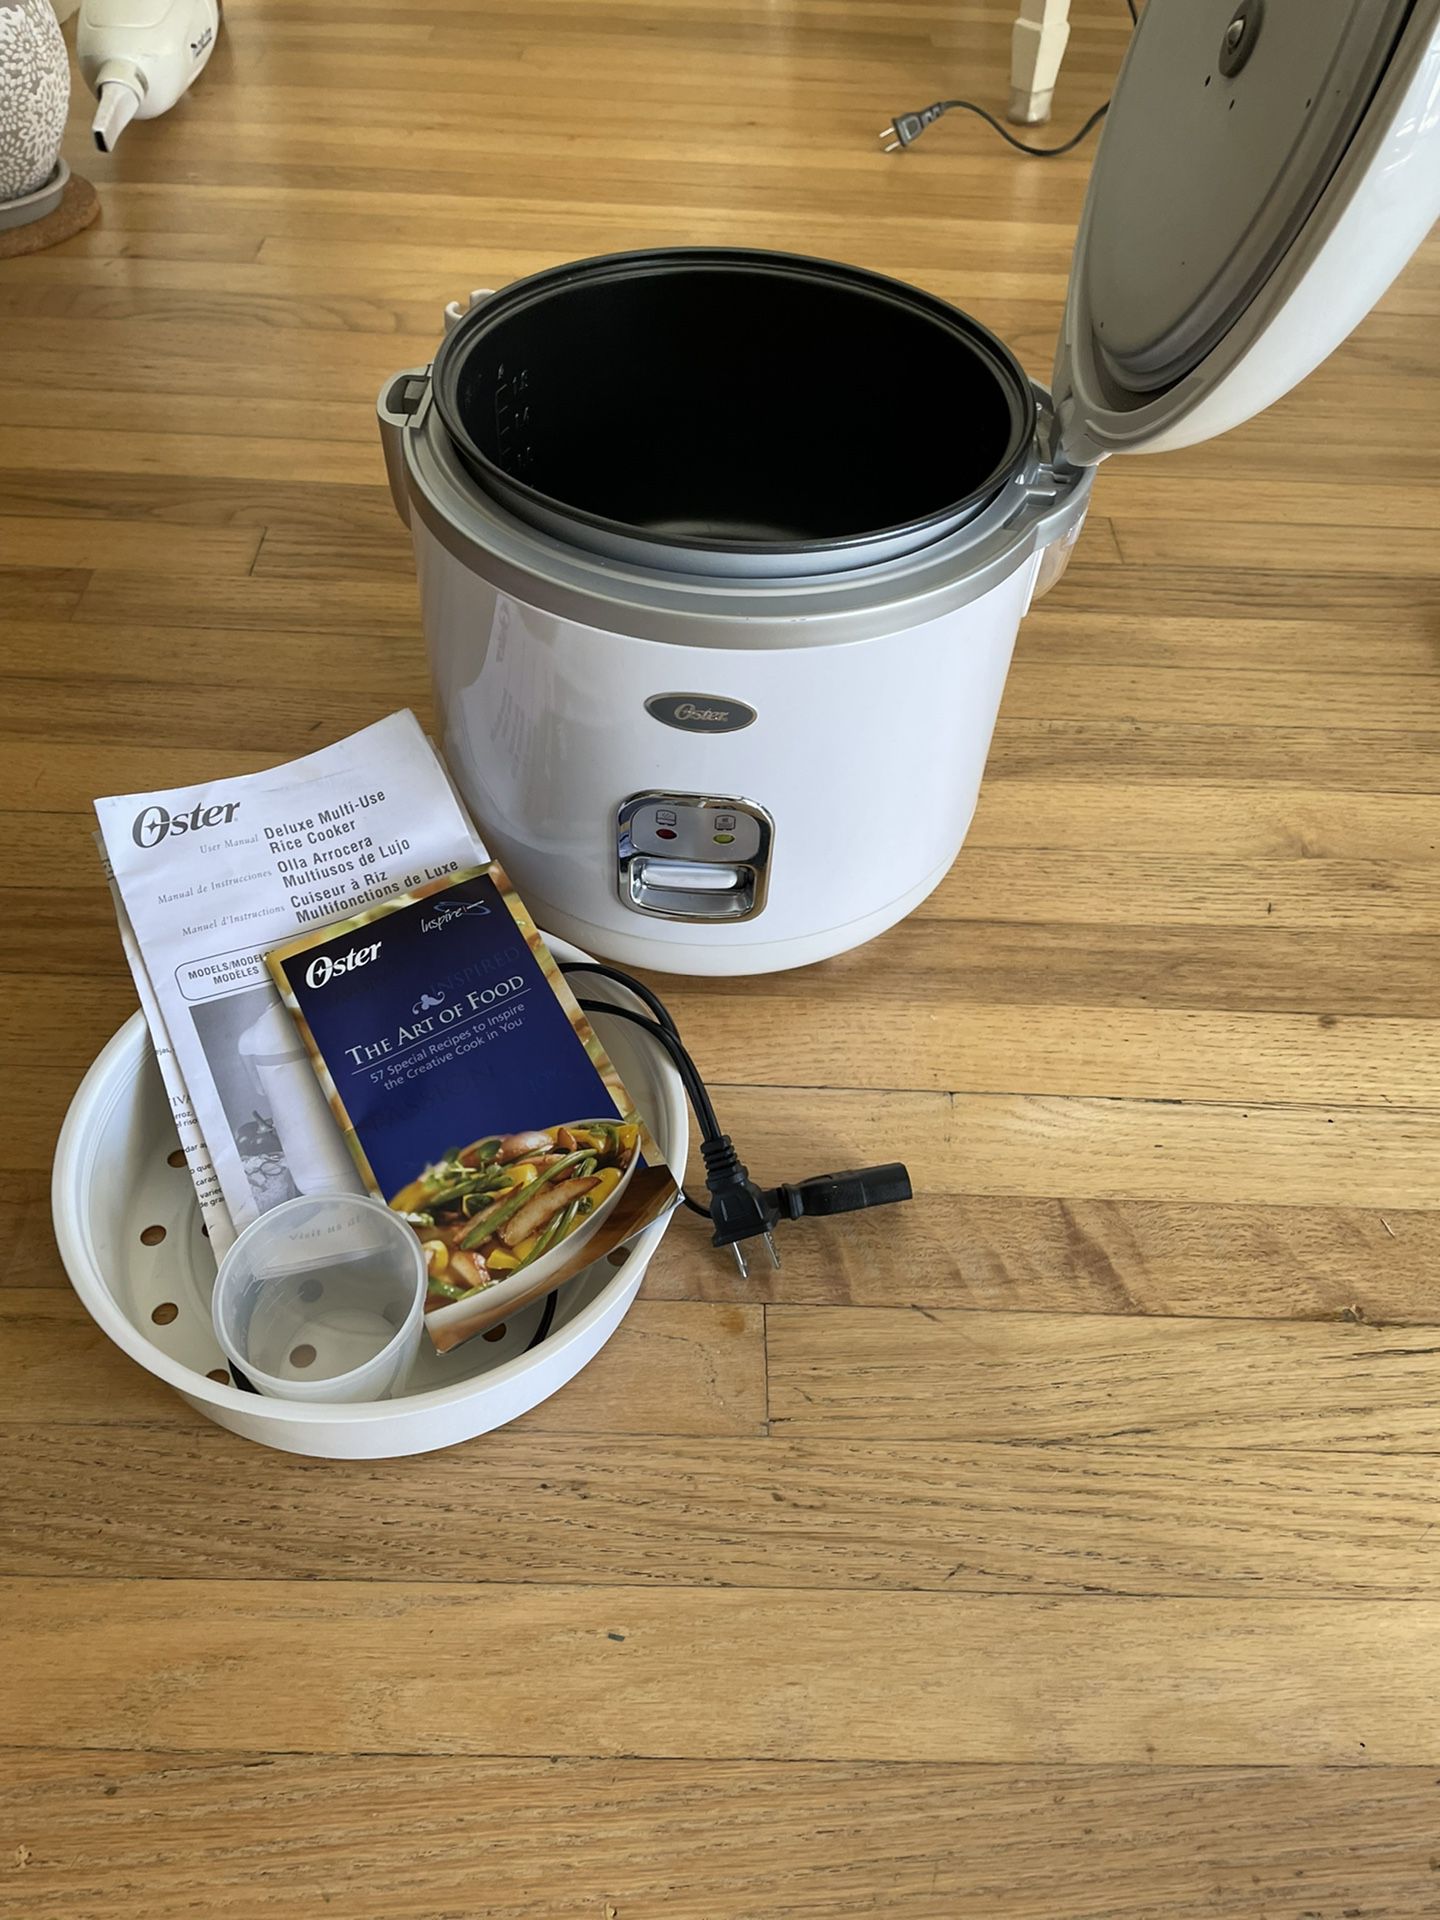 Oster Rice Cooker Instructions